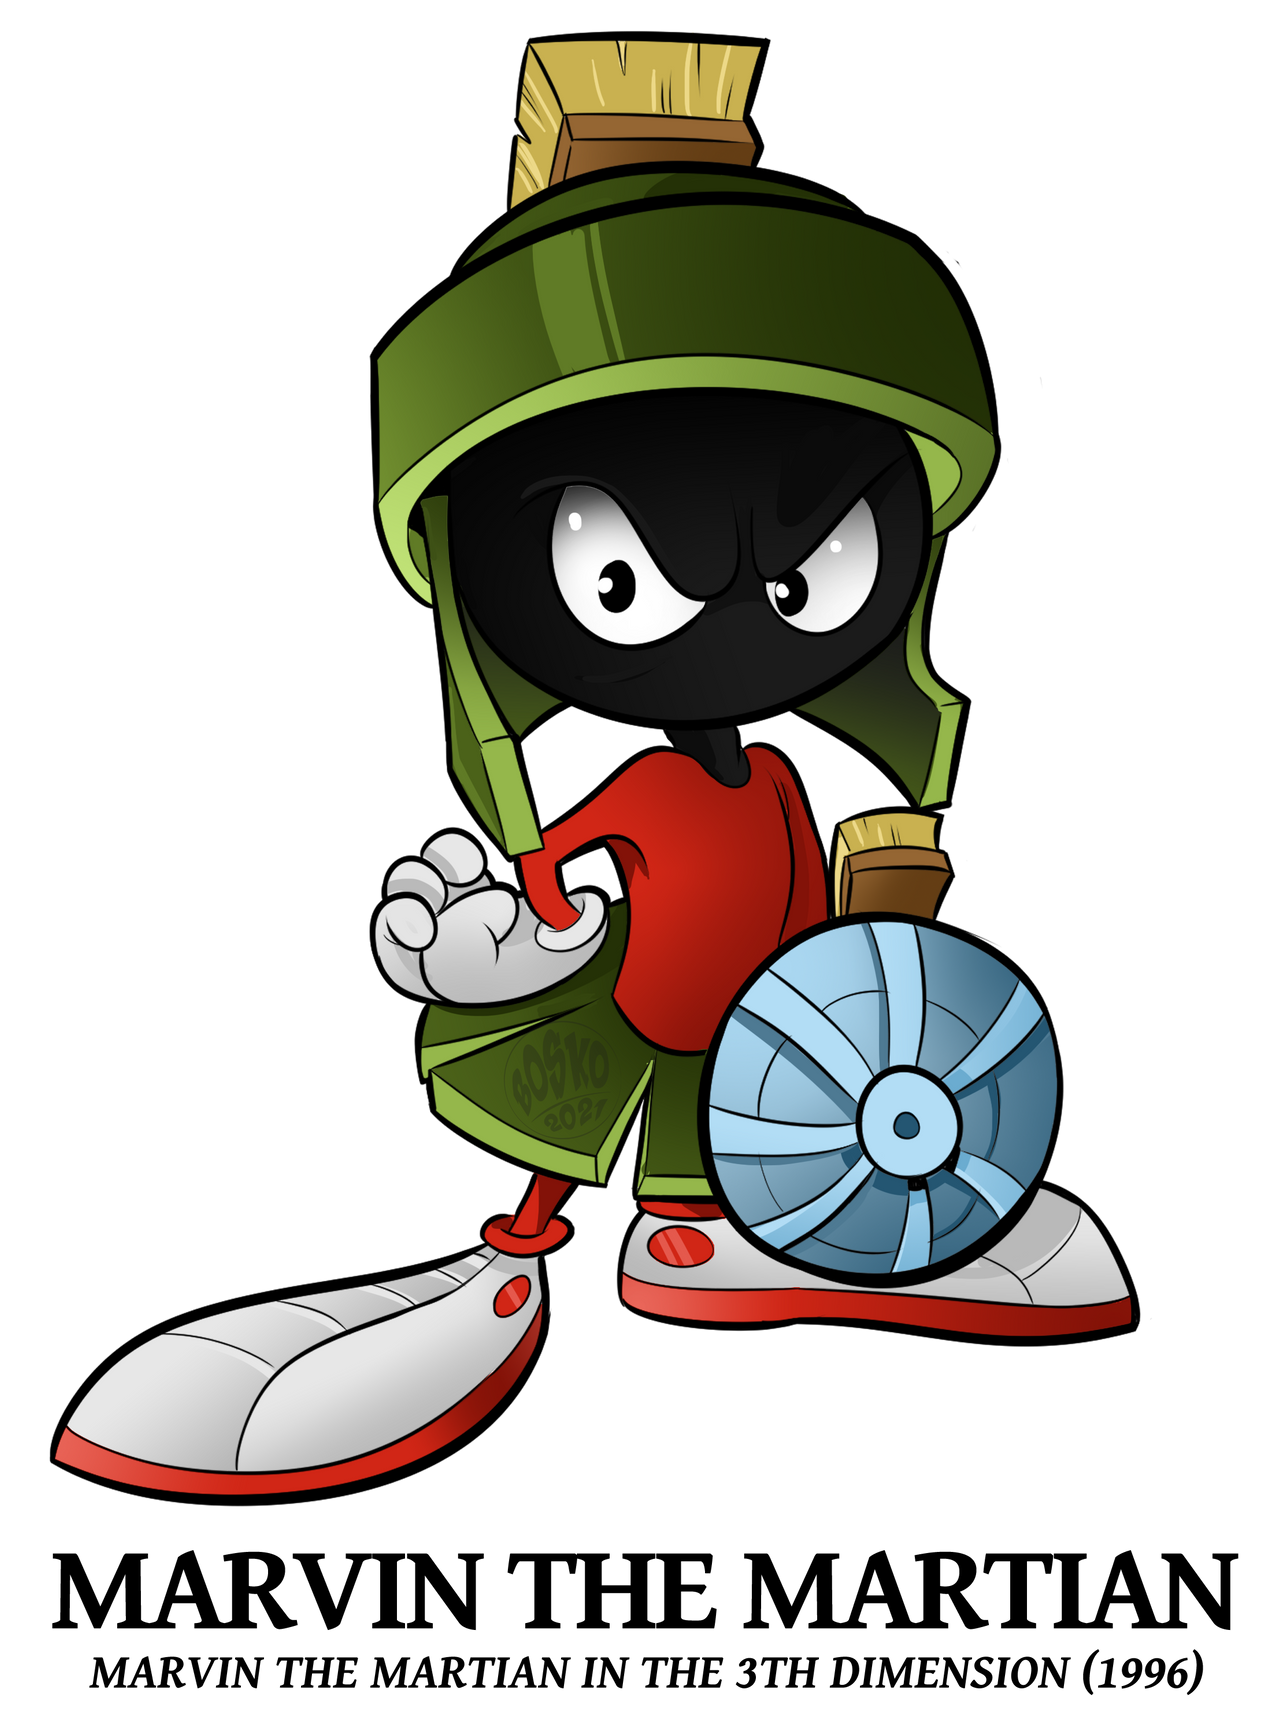 1996 - Marvin the Martian